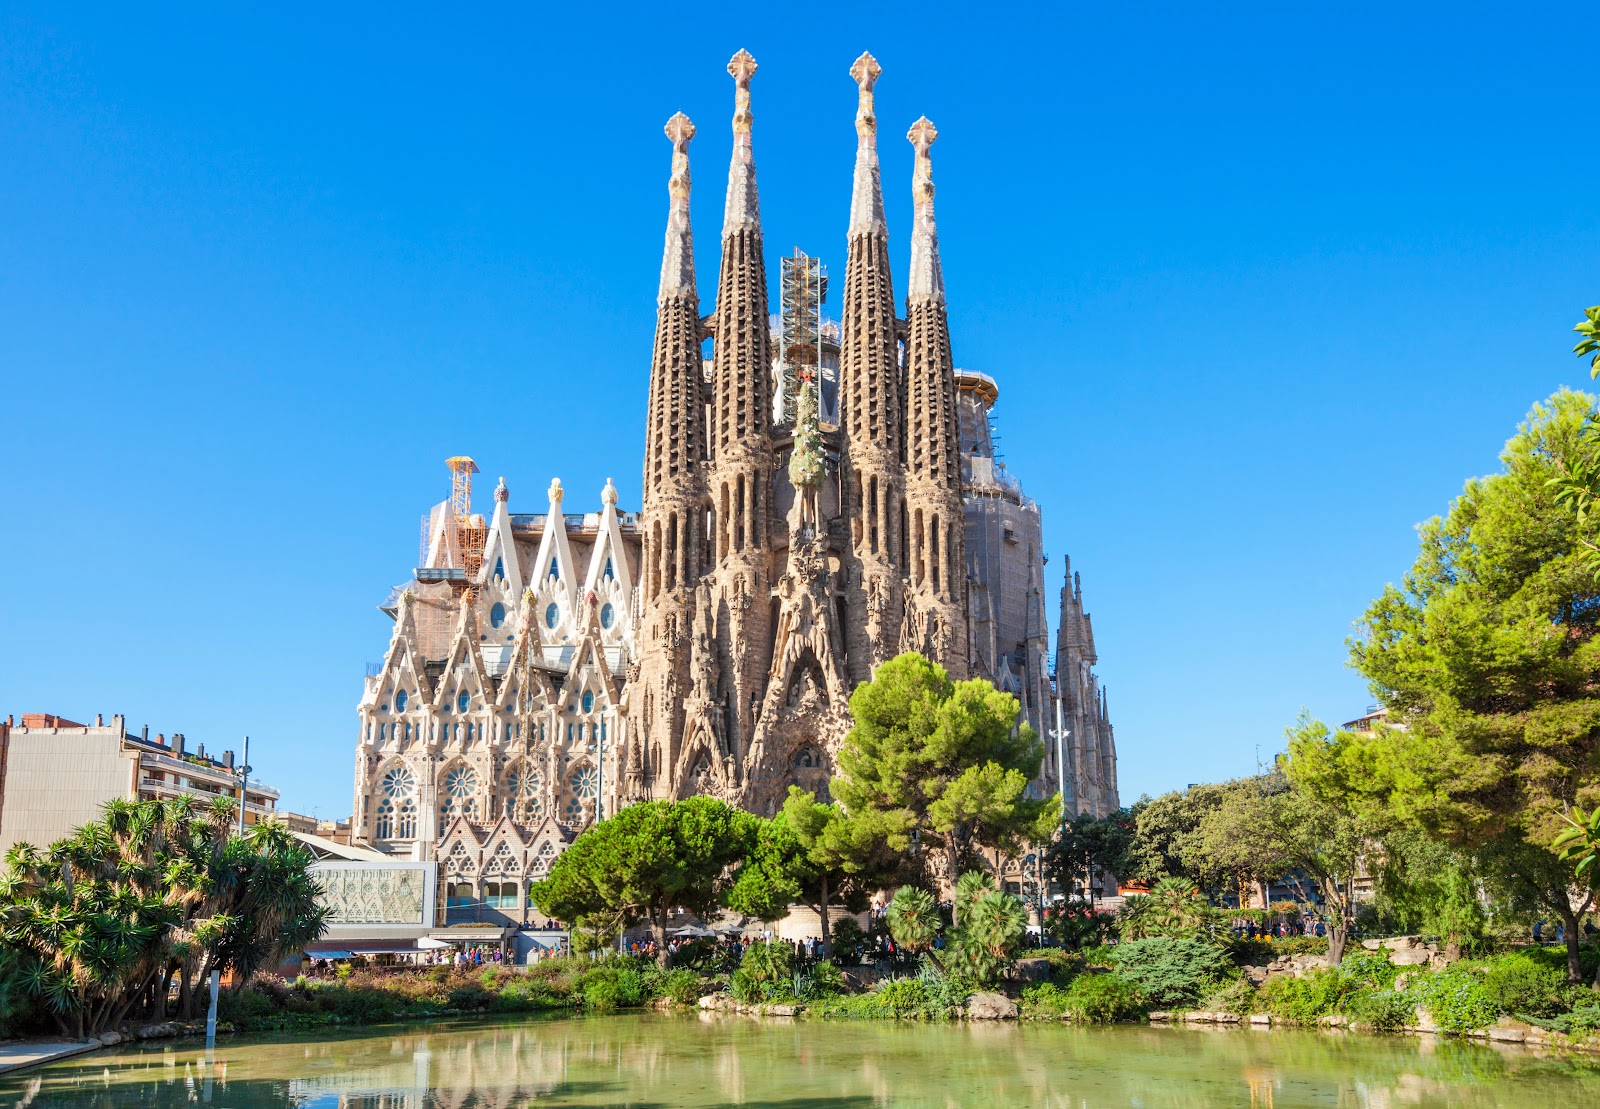 Incomplete La Sagrada Familia Finally Receives Construction Permit 137  Years Later | Architectural Digest